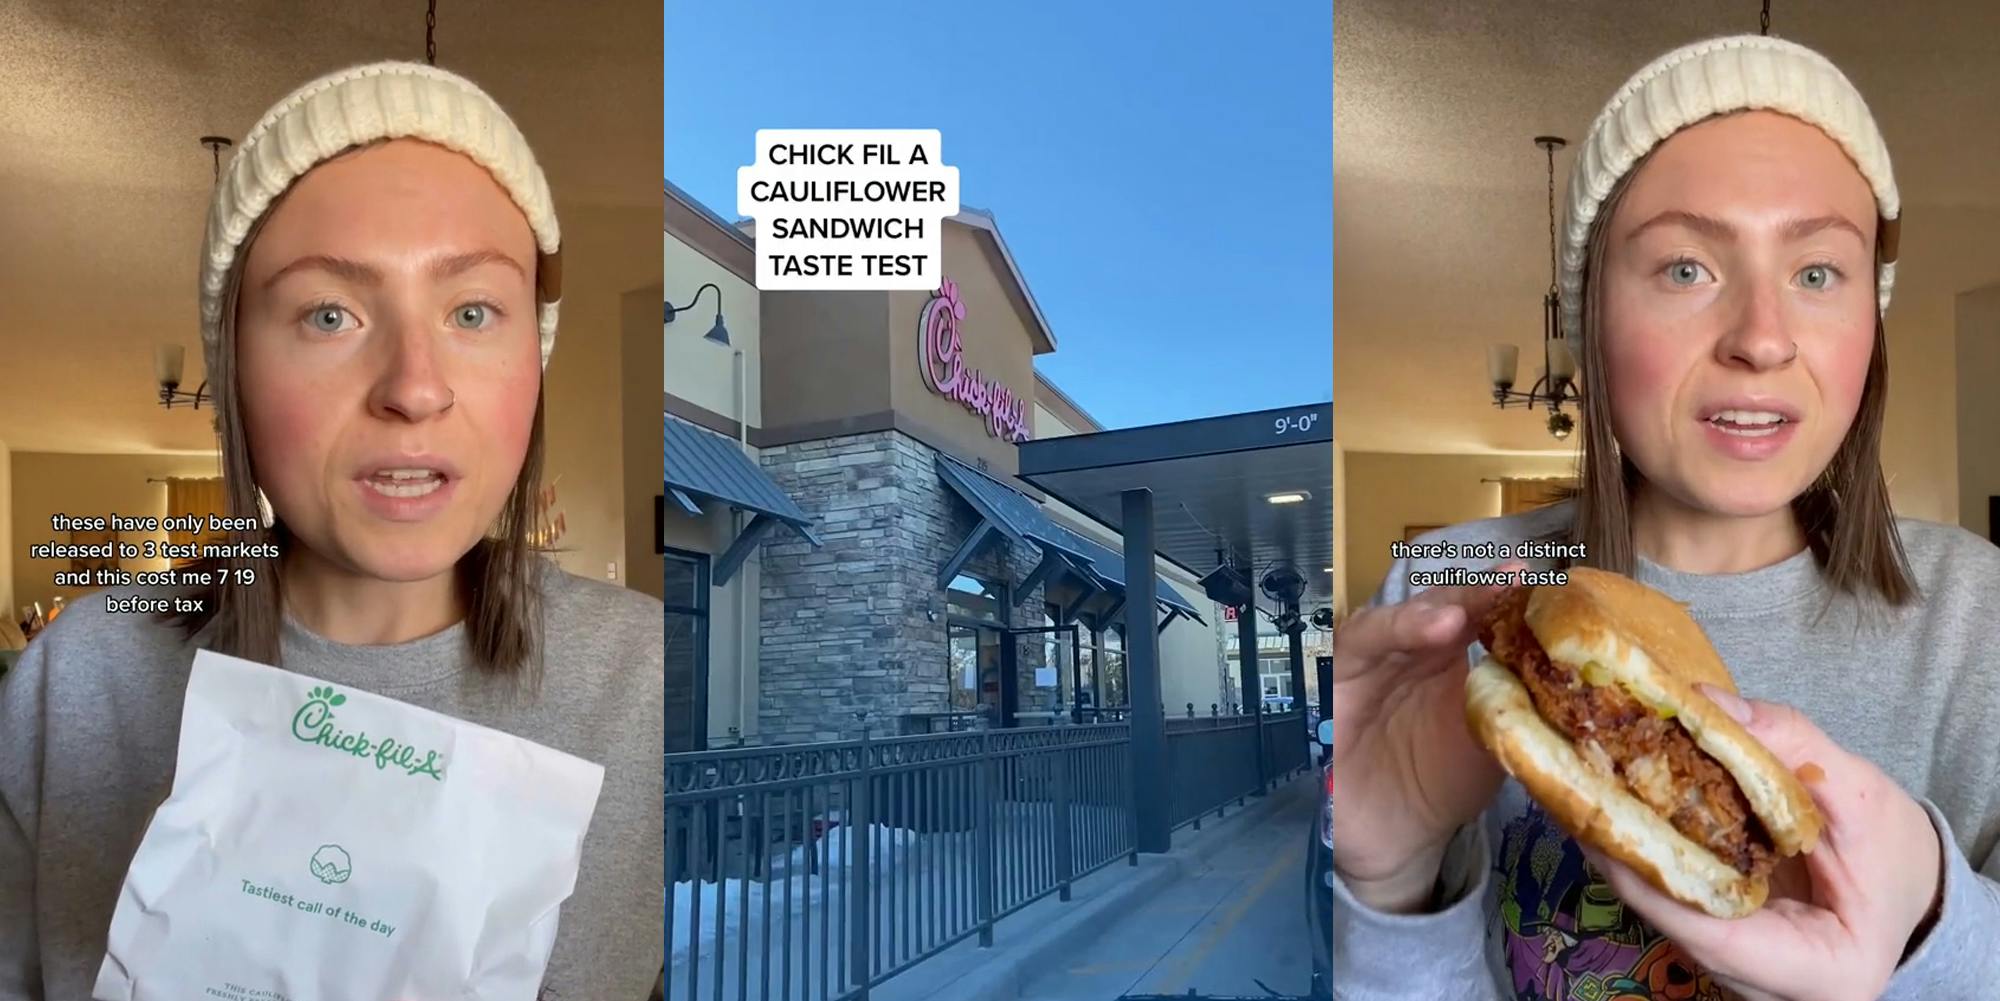 woman holding Chick Fil A sandwich with caption "these have only been released to 3 test markets and this cost me 7.19 before tax" Chick Fil A building with sign and caption "CHICK FIL A CAULIFLOWER SANDWICH TASTE TEST" (c) woman holding sandwich with caption "there's not a distinct cauliflower taste" (r)